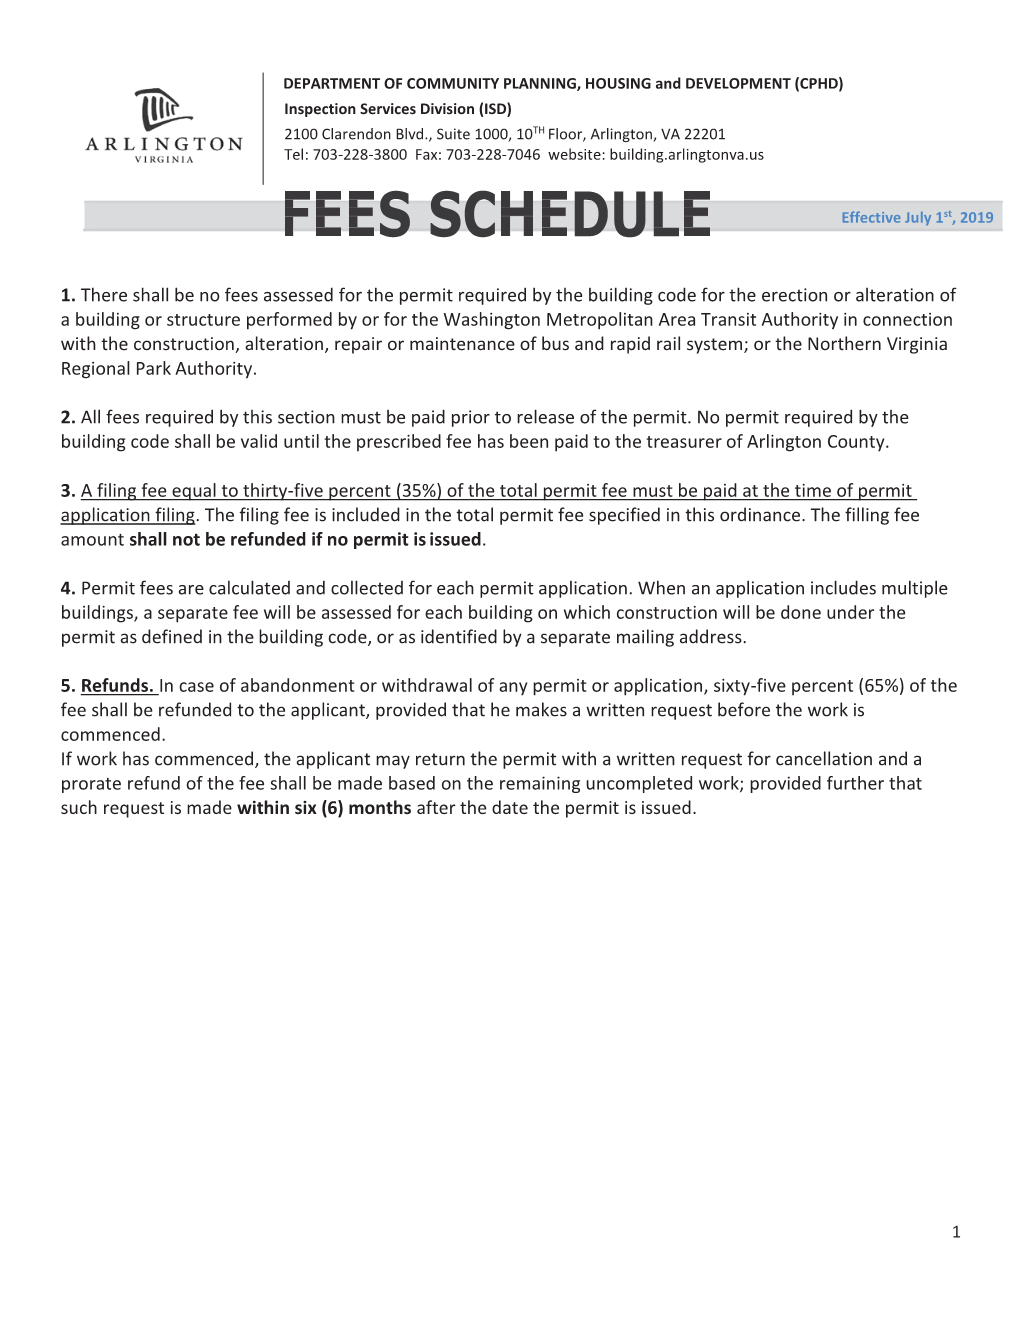 1. There Shall Be No Fees Assessed for the Permit Required by the Building